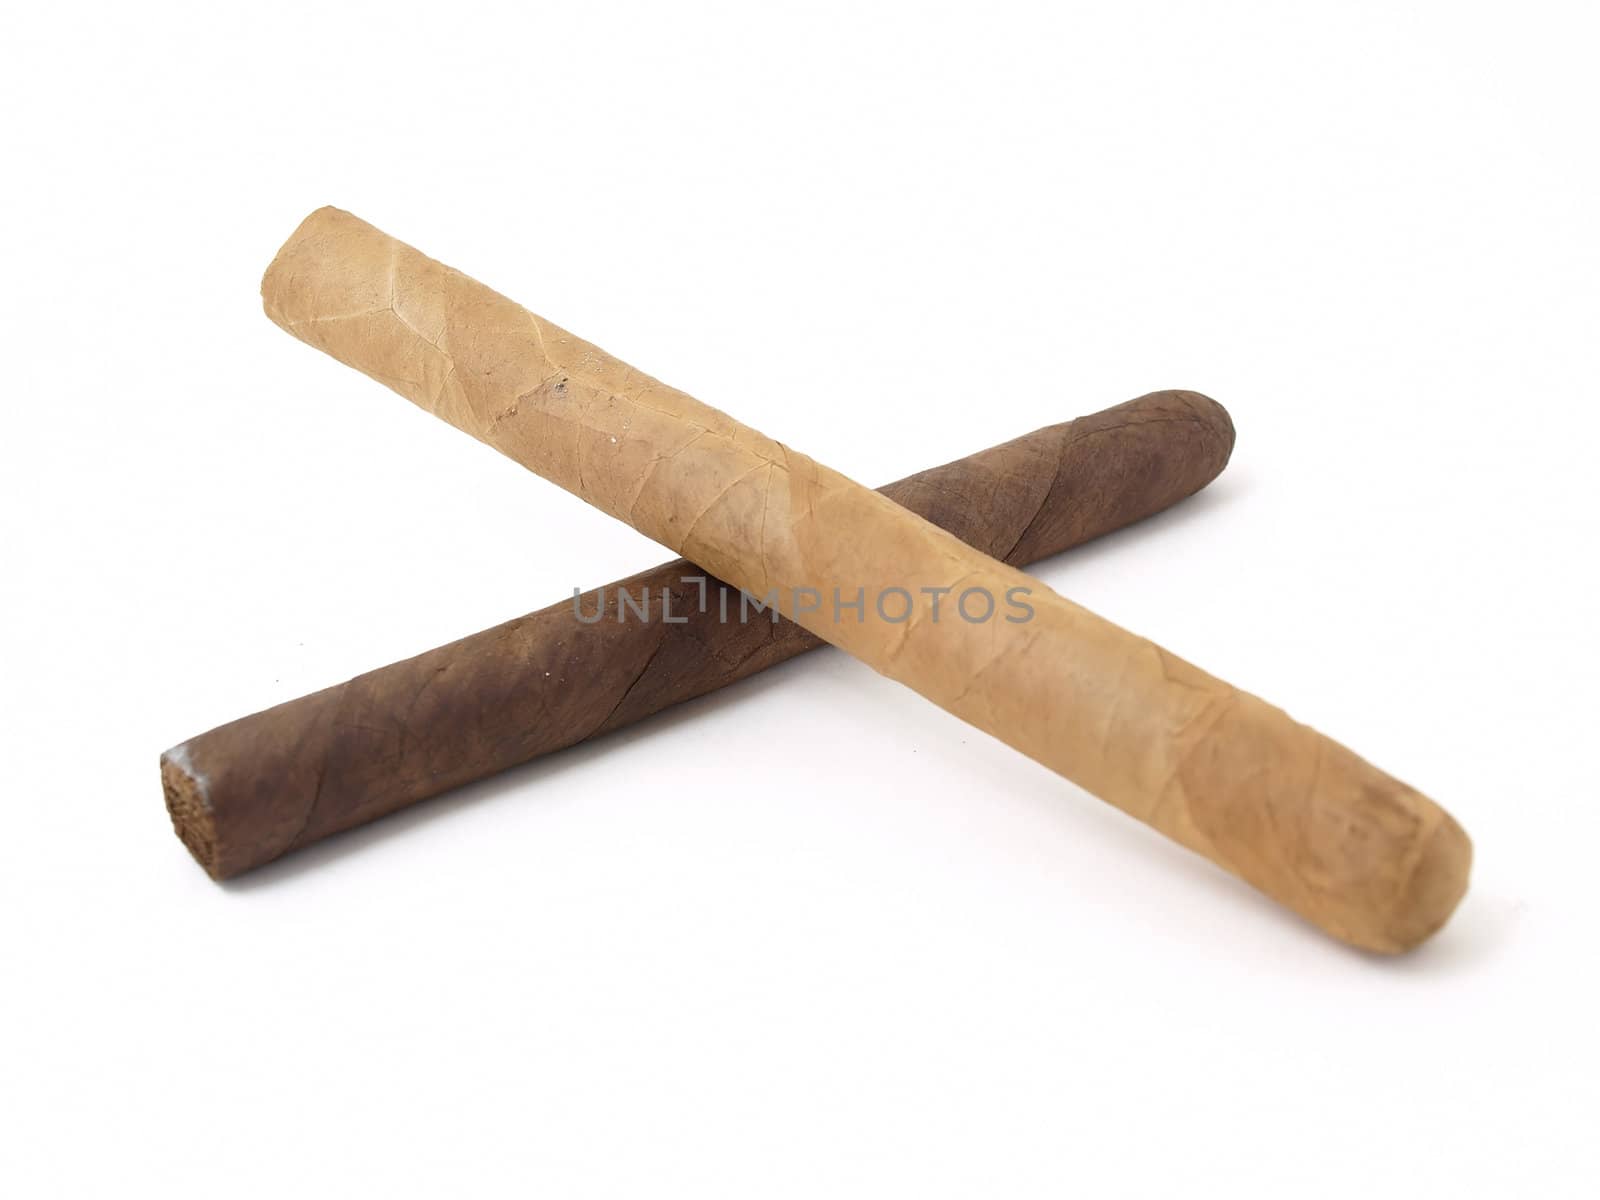 Two unlit cigars, studio isolated against a white background.